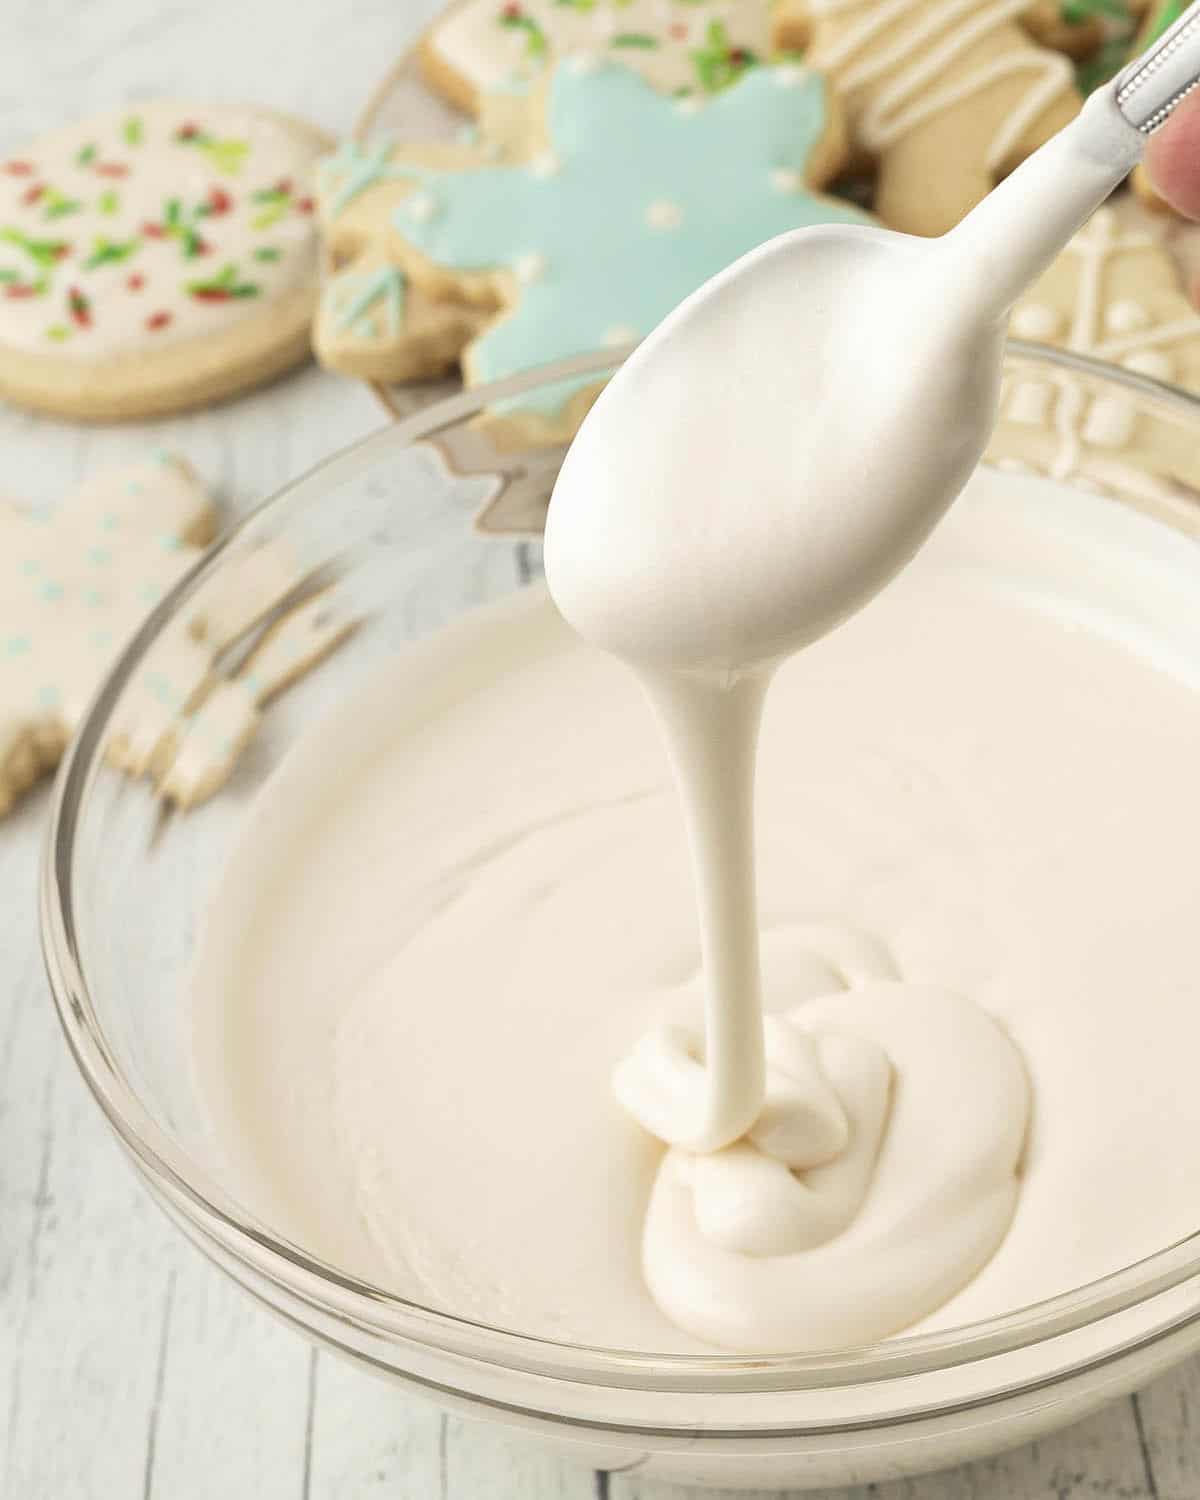 A bowl of eggless royal icing on a table, a spoon of icing is being held over the bowl, cookies sit behind the bowl.